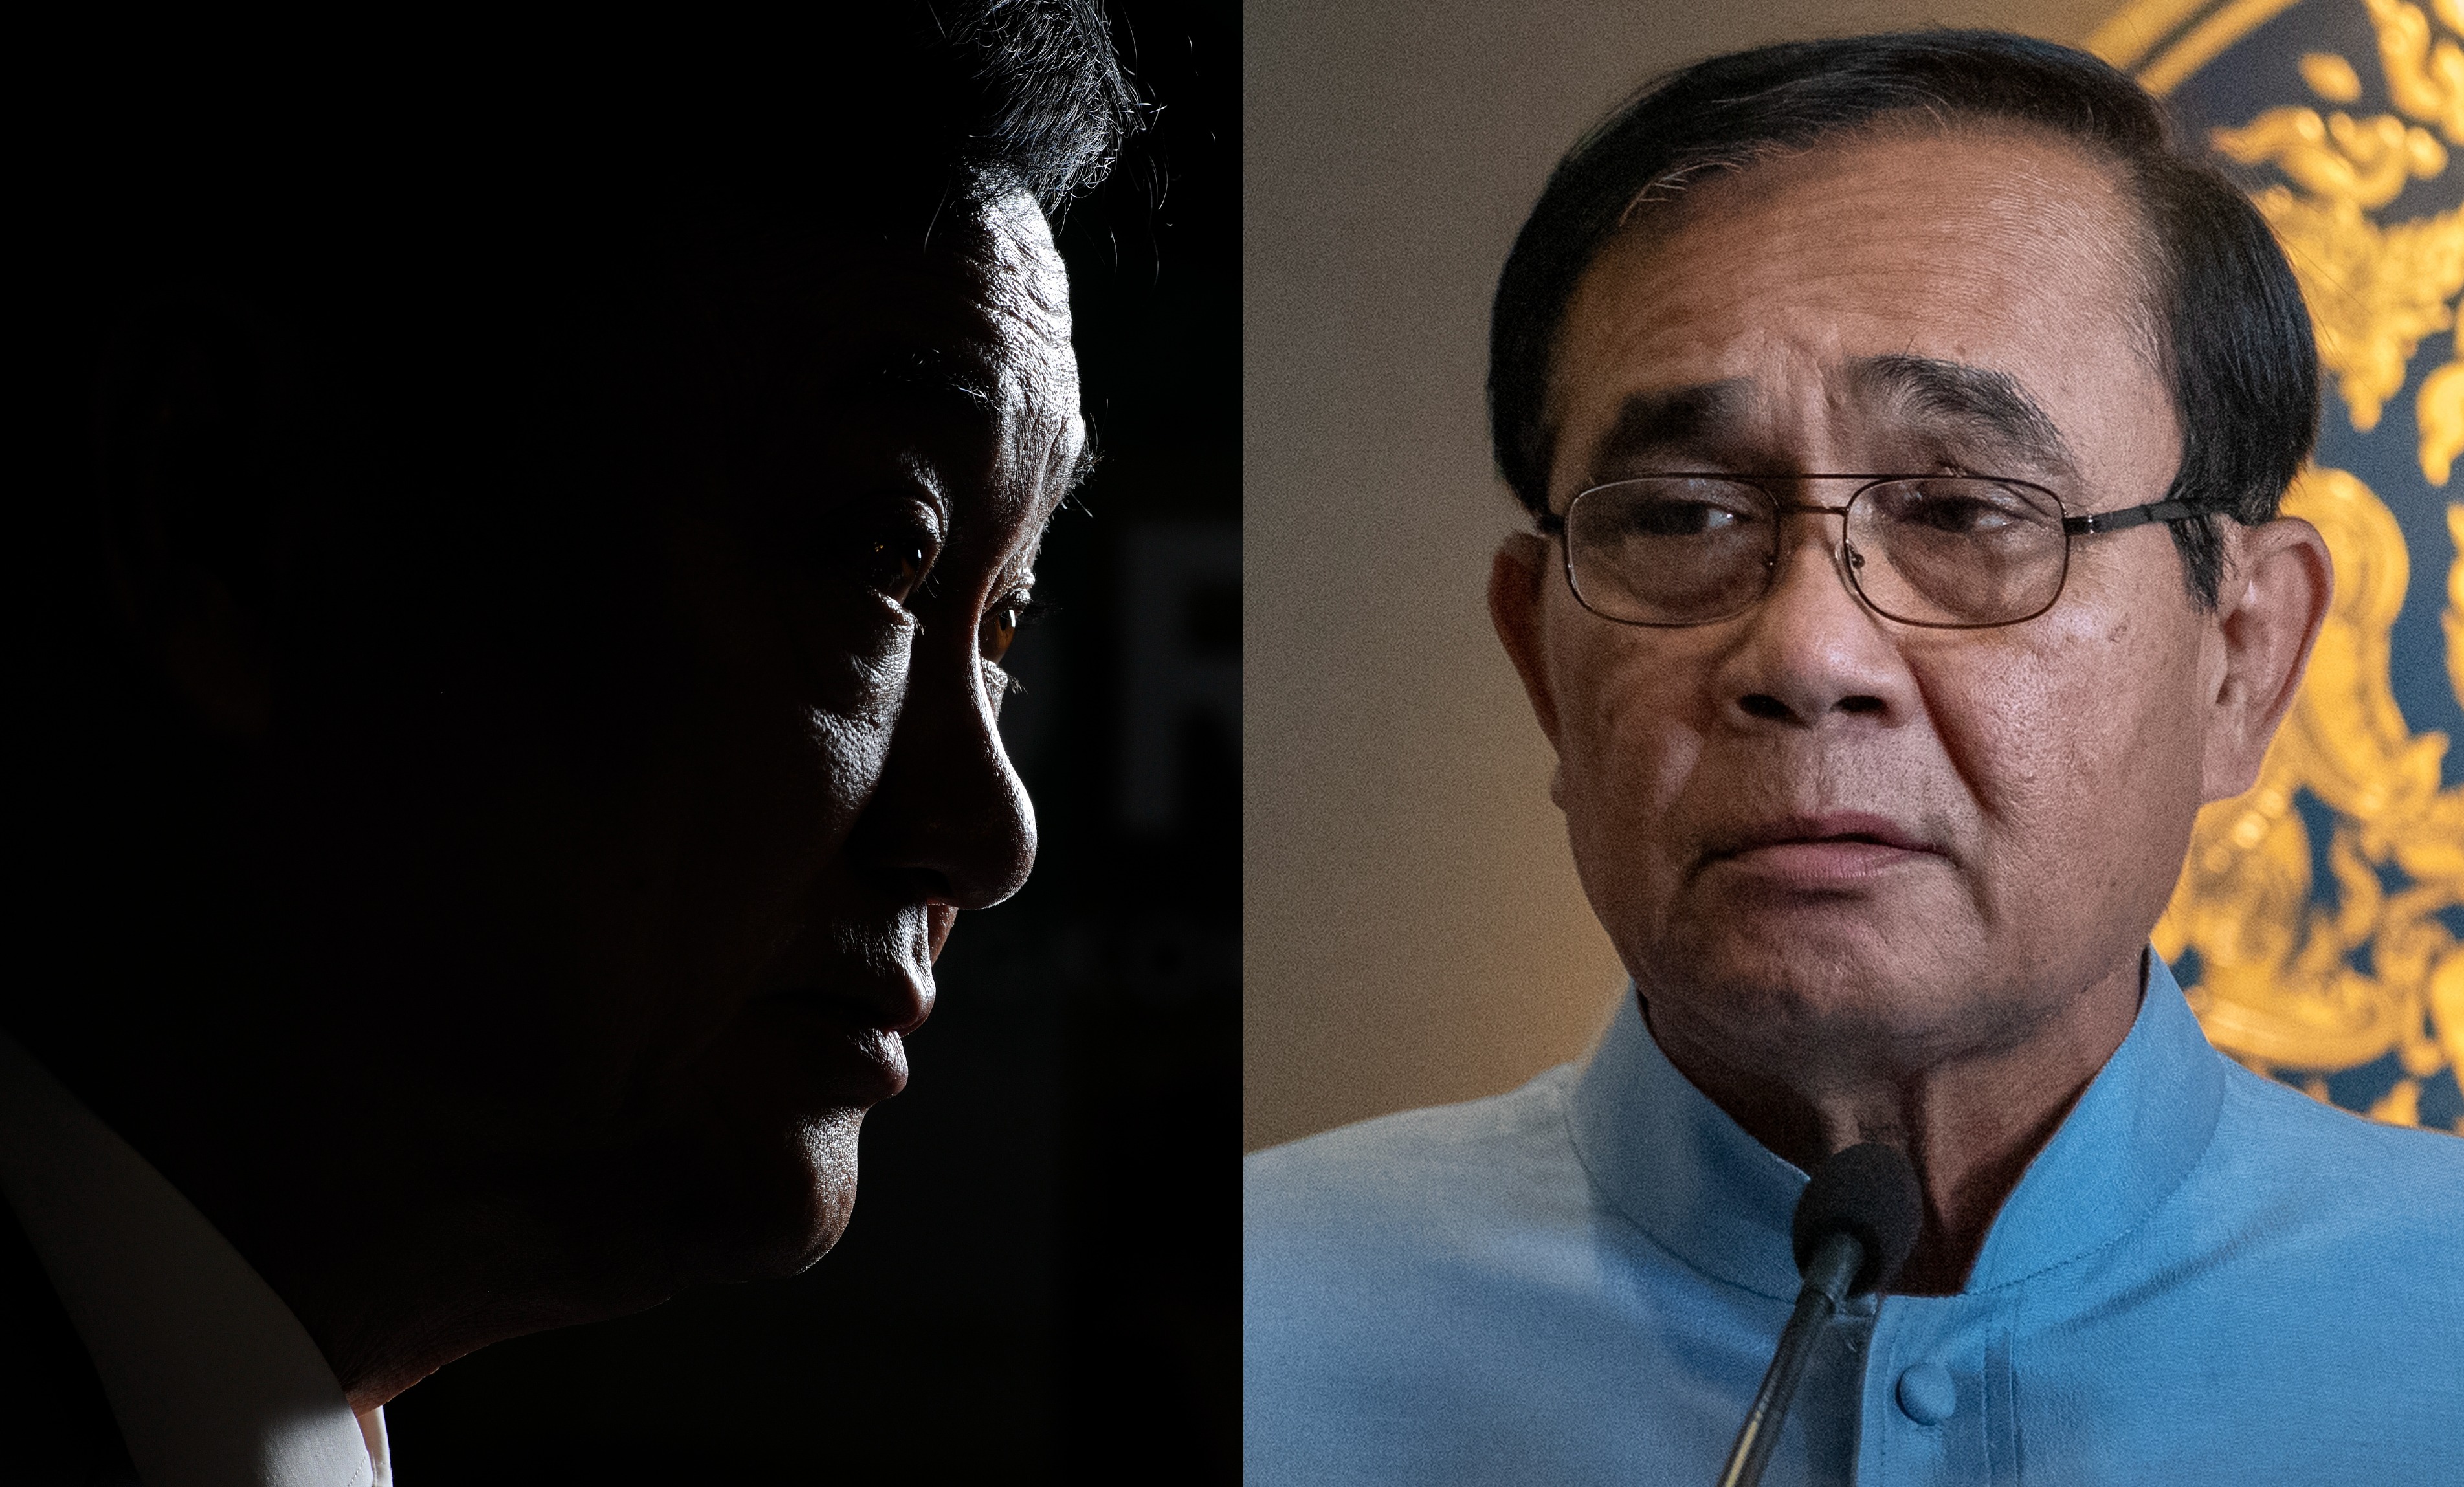 Left: Thaksin Shinawatra, the ousted populist former Prime Minister. Right: Prime Minister Prayuth Chan-ocha, the military leader defeated at the polls on Sunday. (Munshi Ahmed/Bloomberg and Jes Aznar — Getty Images)